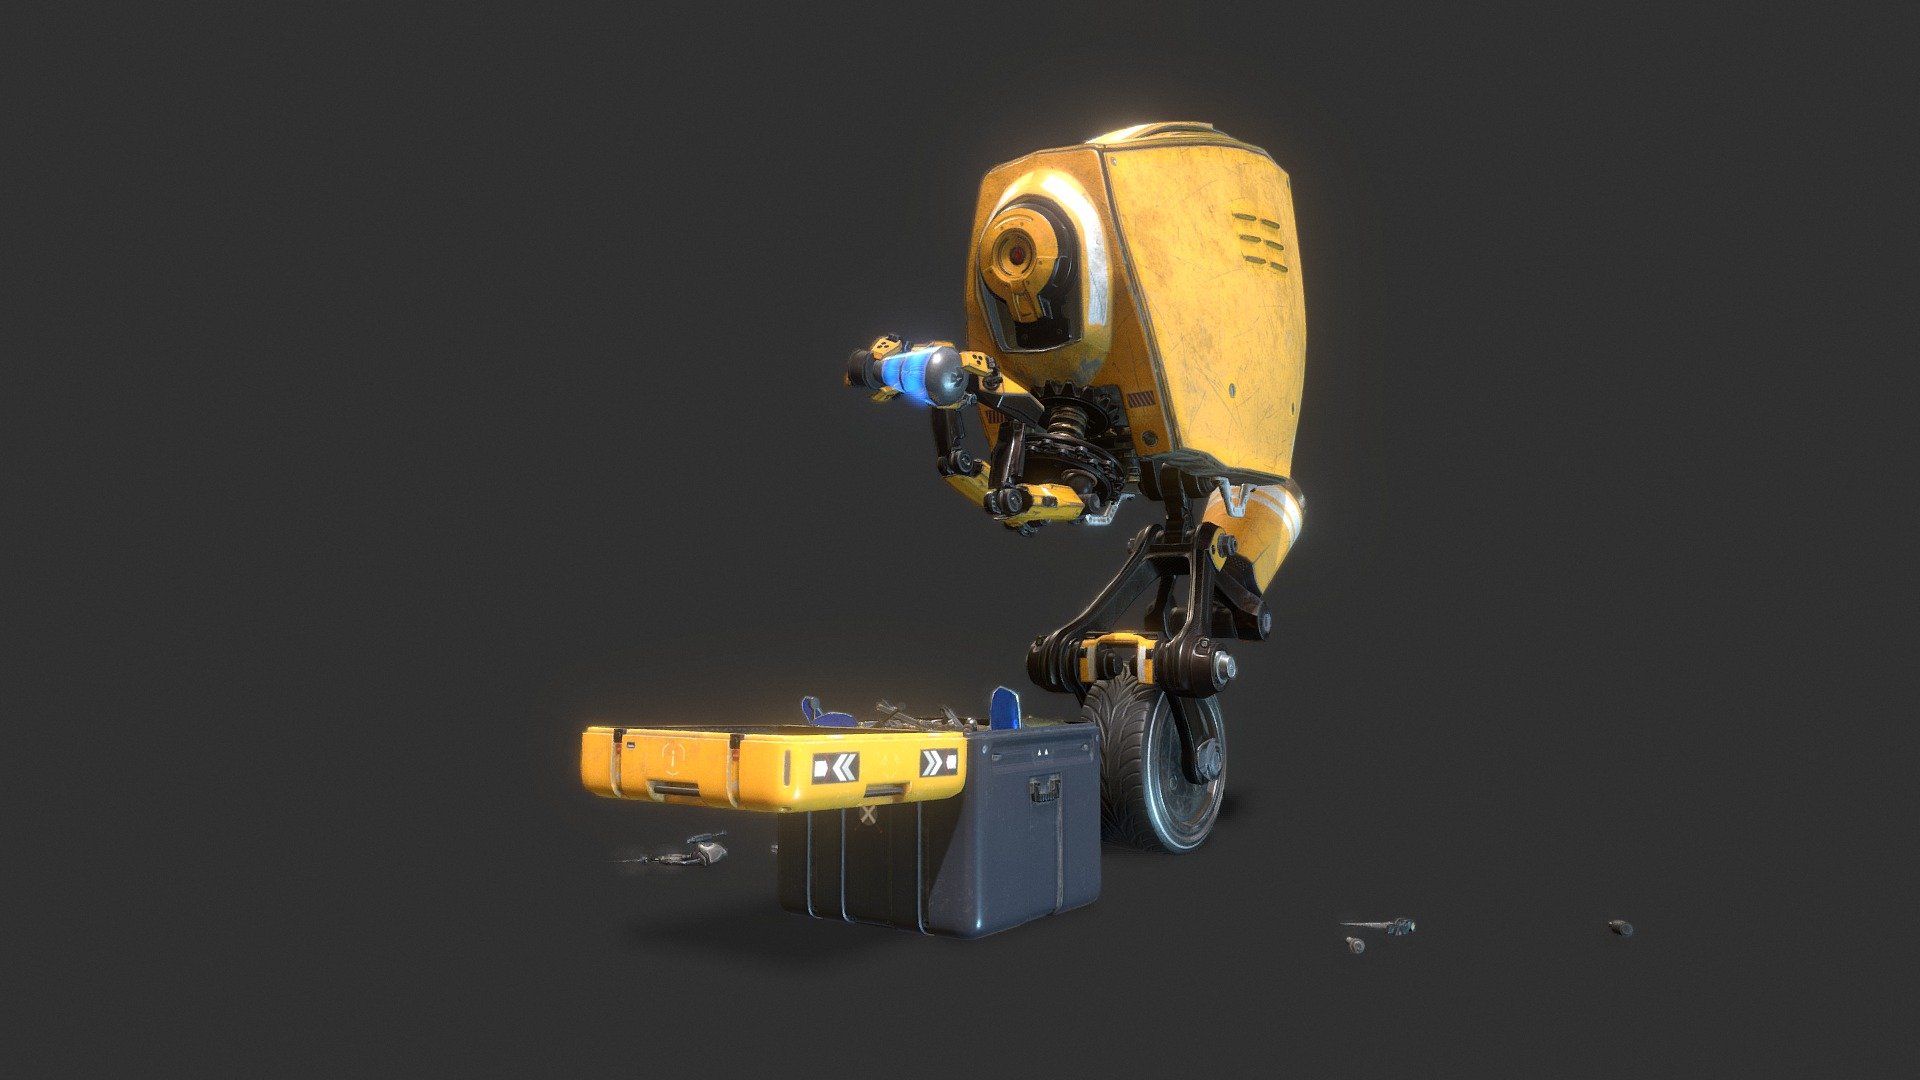 3D model of Cyber Monocykl Sci-Fi Robot with Sci-fi Loot Box

Resolution of textures: 4096Max4096
Textured created with Substance Painter - Monocykl Sci-Fi Robot Low-poly 3D model - Buy Royalty Free 3D model by danielmikulik 3d model